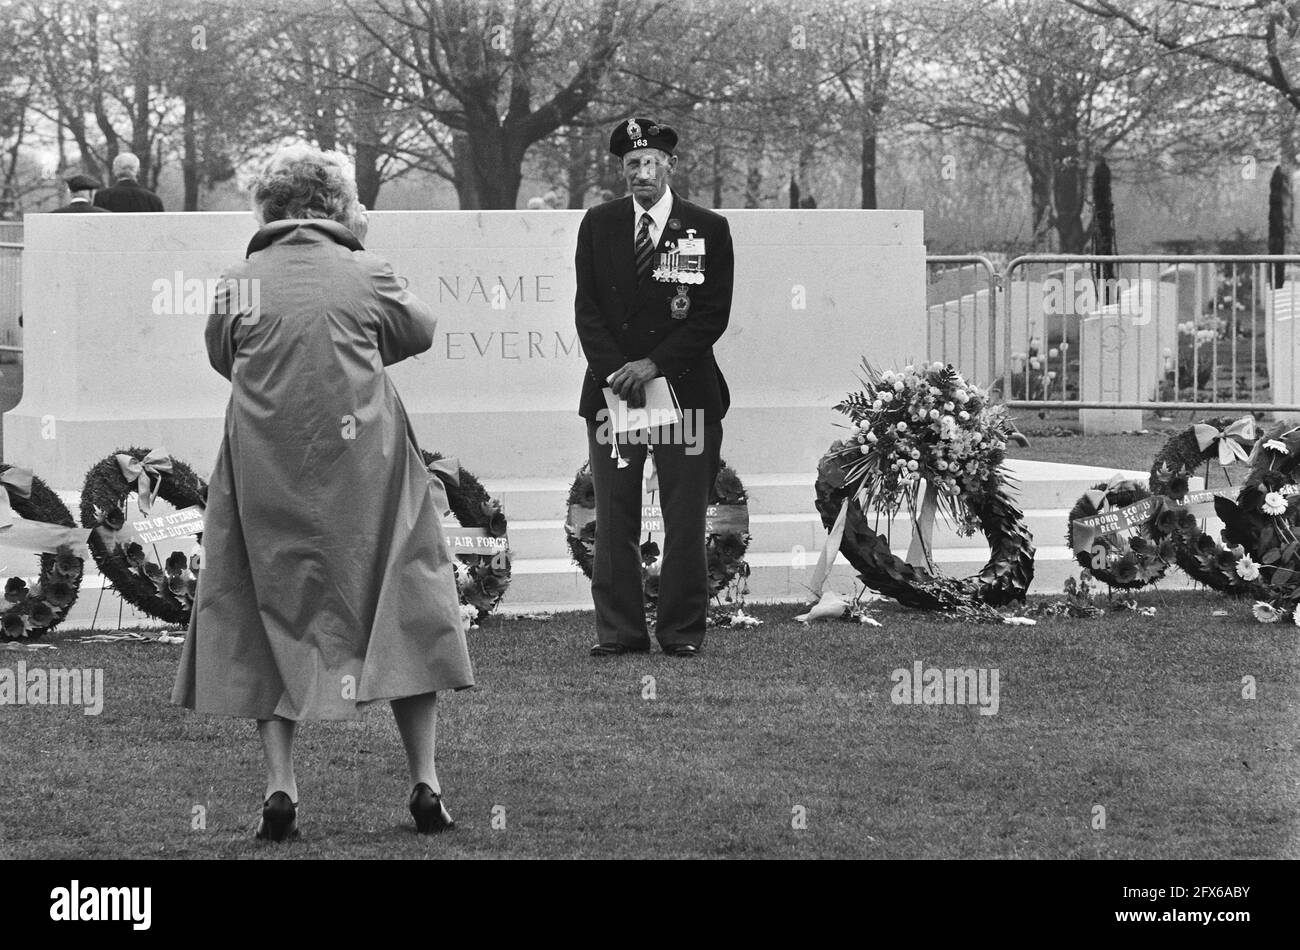 Memorial service at Canadian War Cemetery in Groesbeek in honor of Princess Margriet, veterans photographing the graves, 7 May 1985, honorary cemeteries, veterans, The Netherlands, 20th century press agency photo, news to remember, documentary, historic photography 1945-1990, visual stories, human history of the Twentieth Century, capturing moments in time Stock Photo